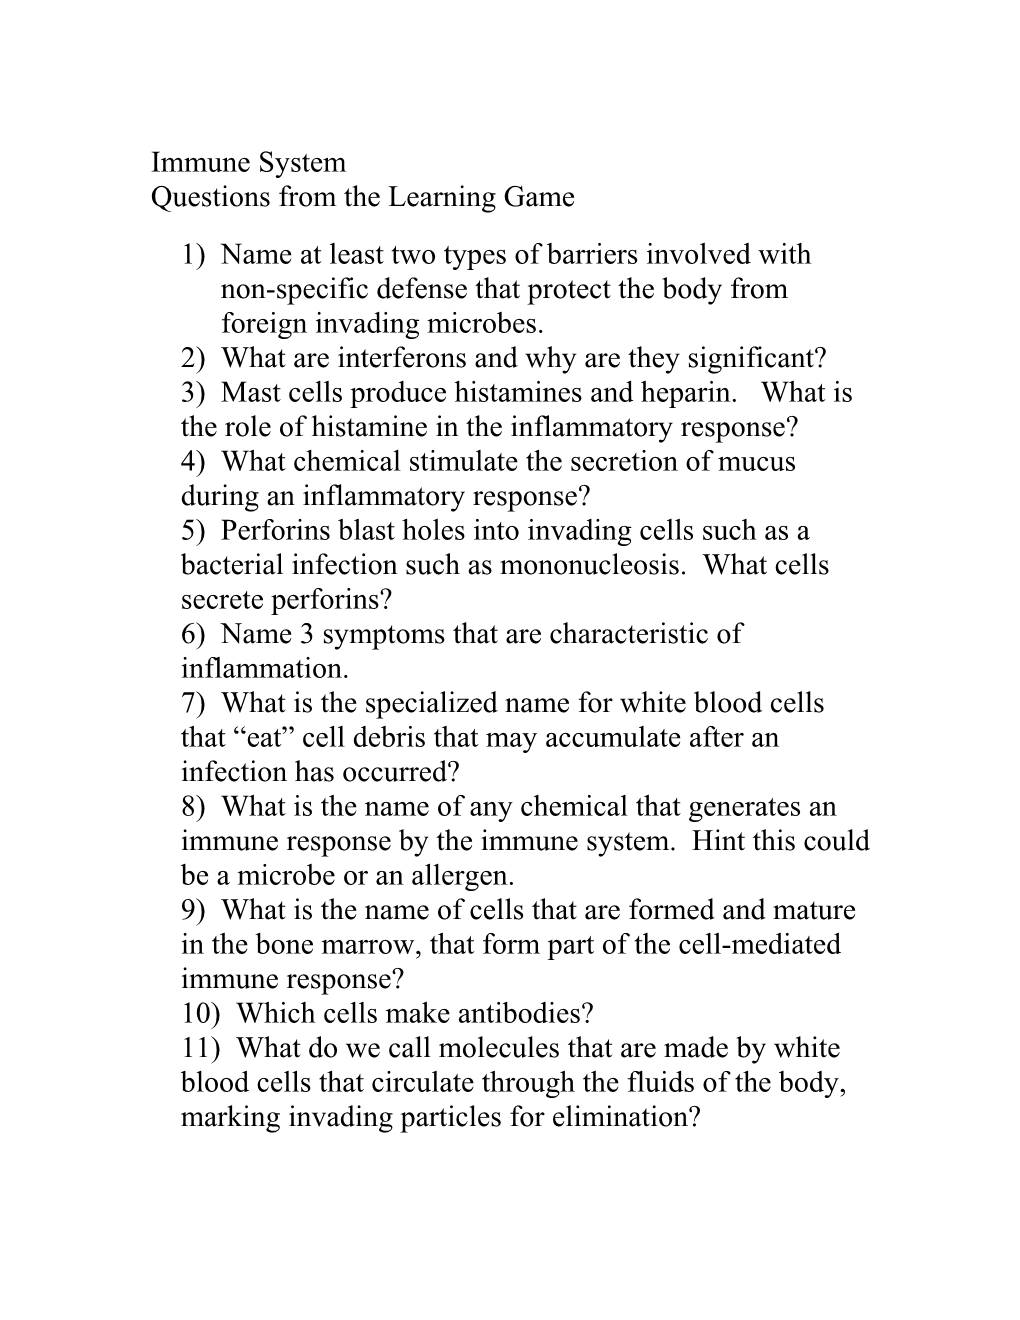 Questions from the Learning Game